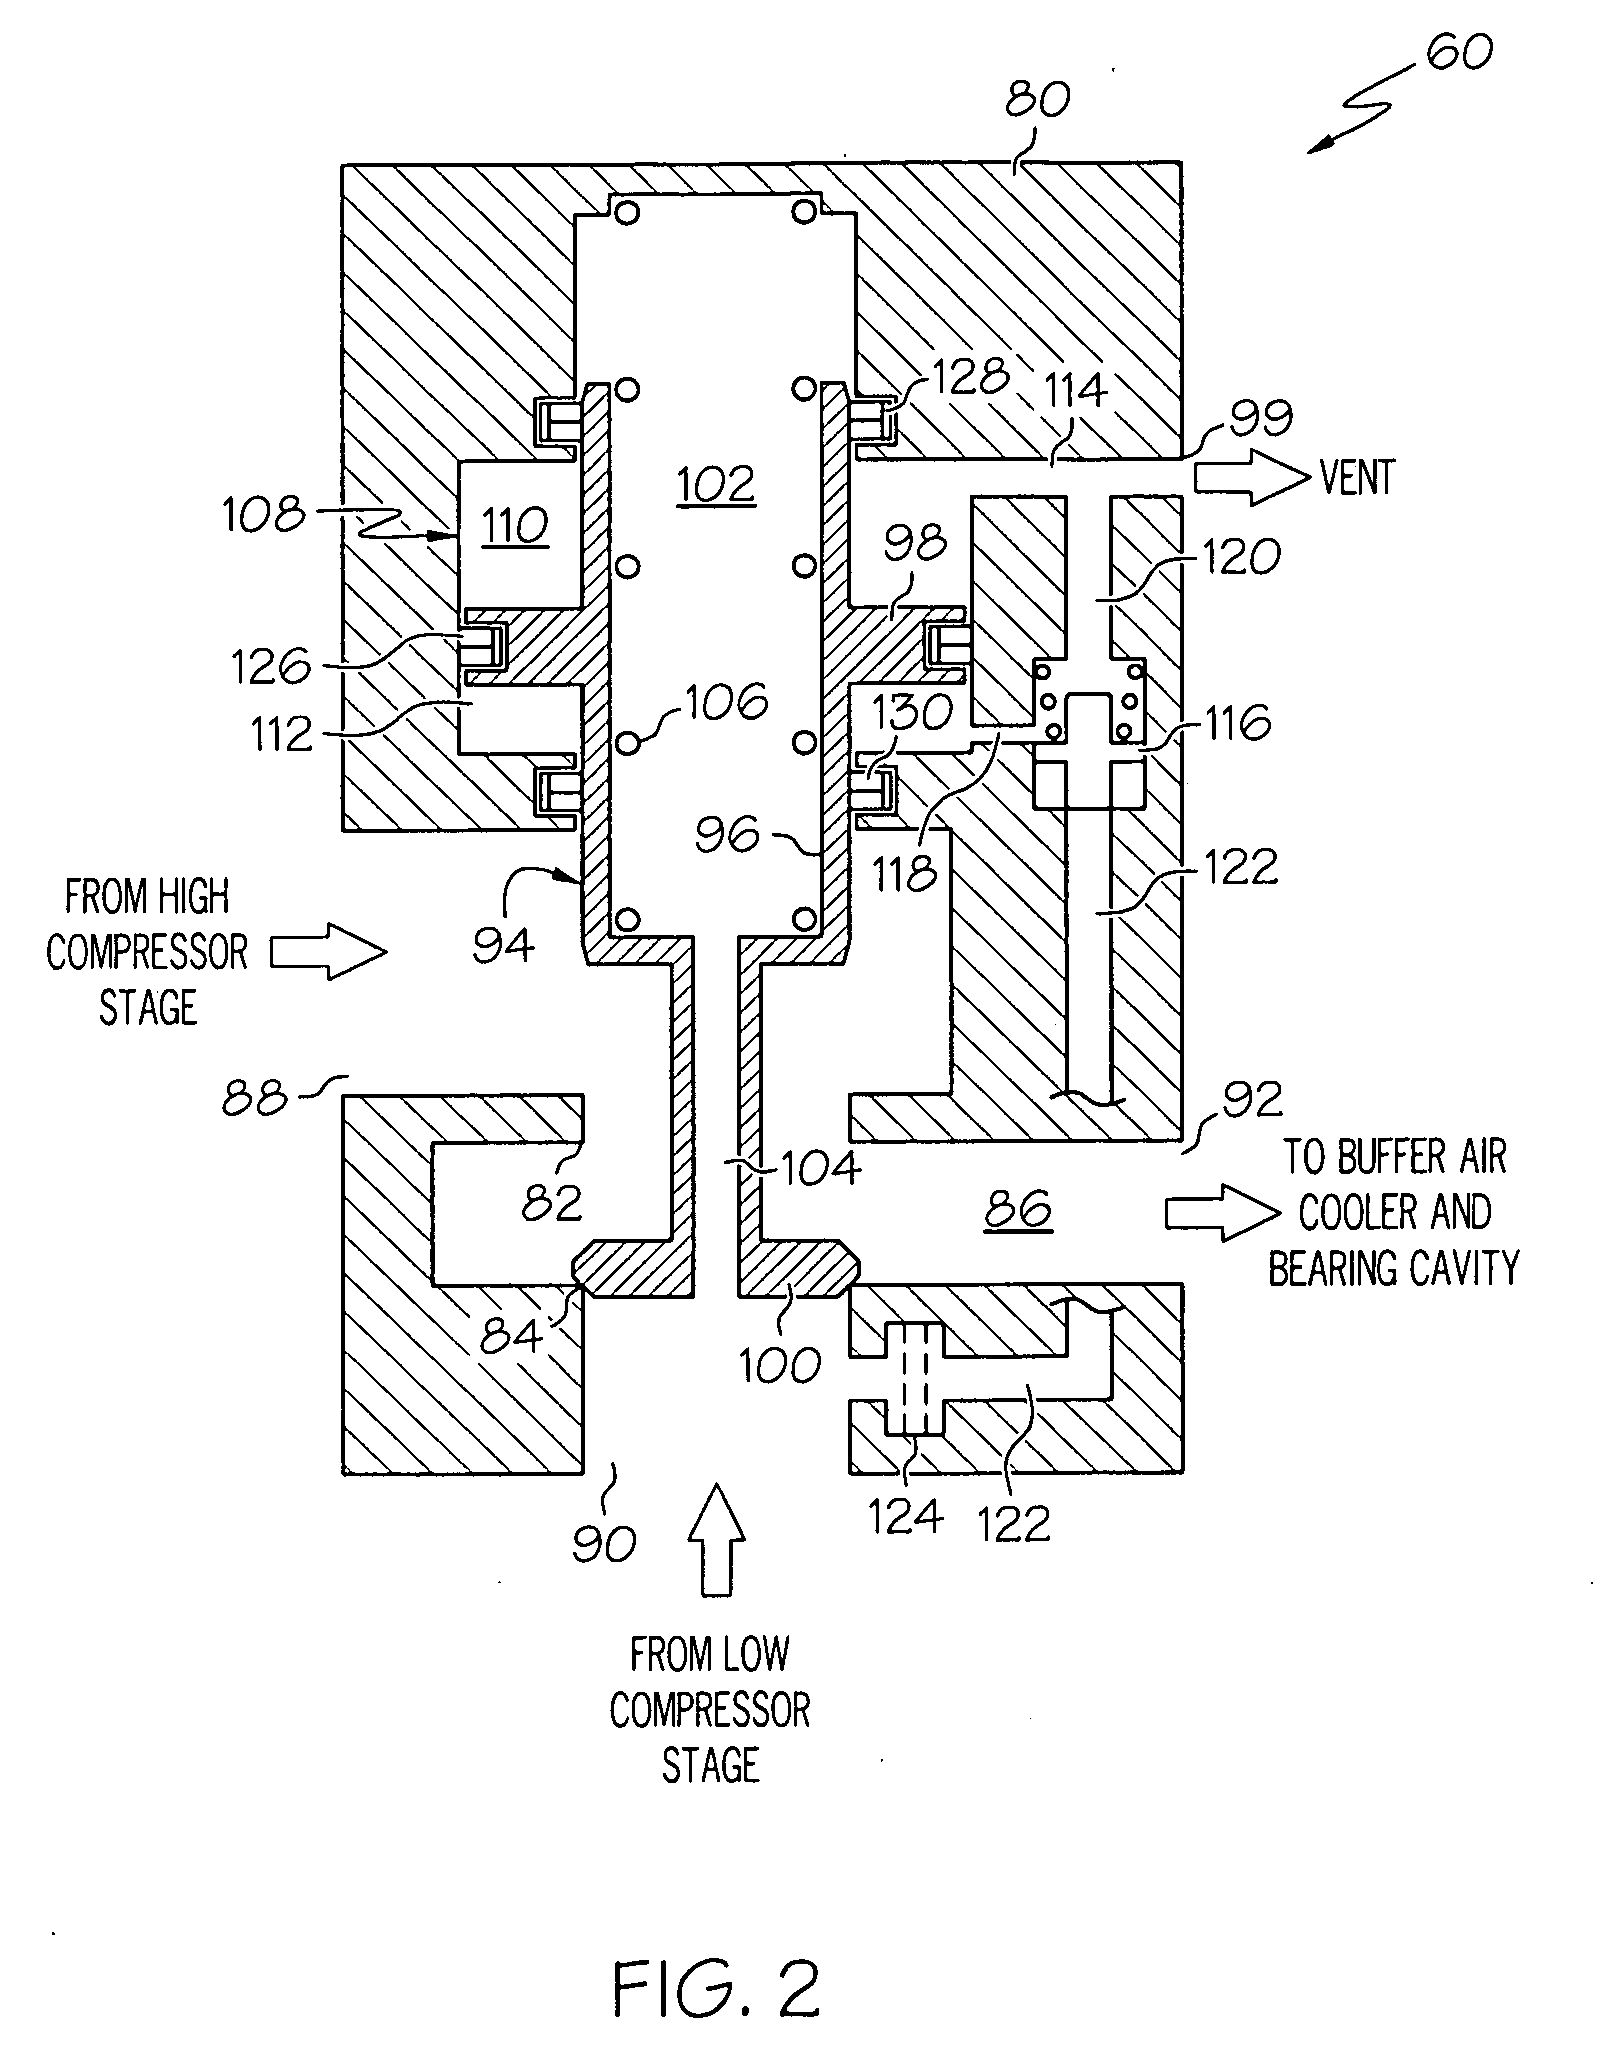 Pressure balanced valve assembly and aircraft buffer cooler system employing the same